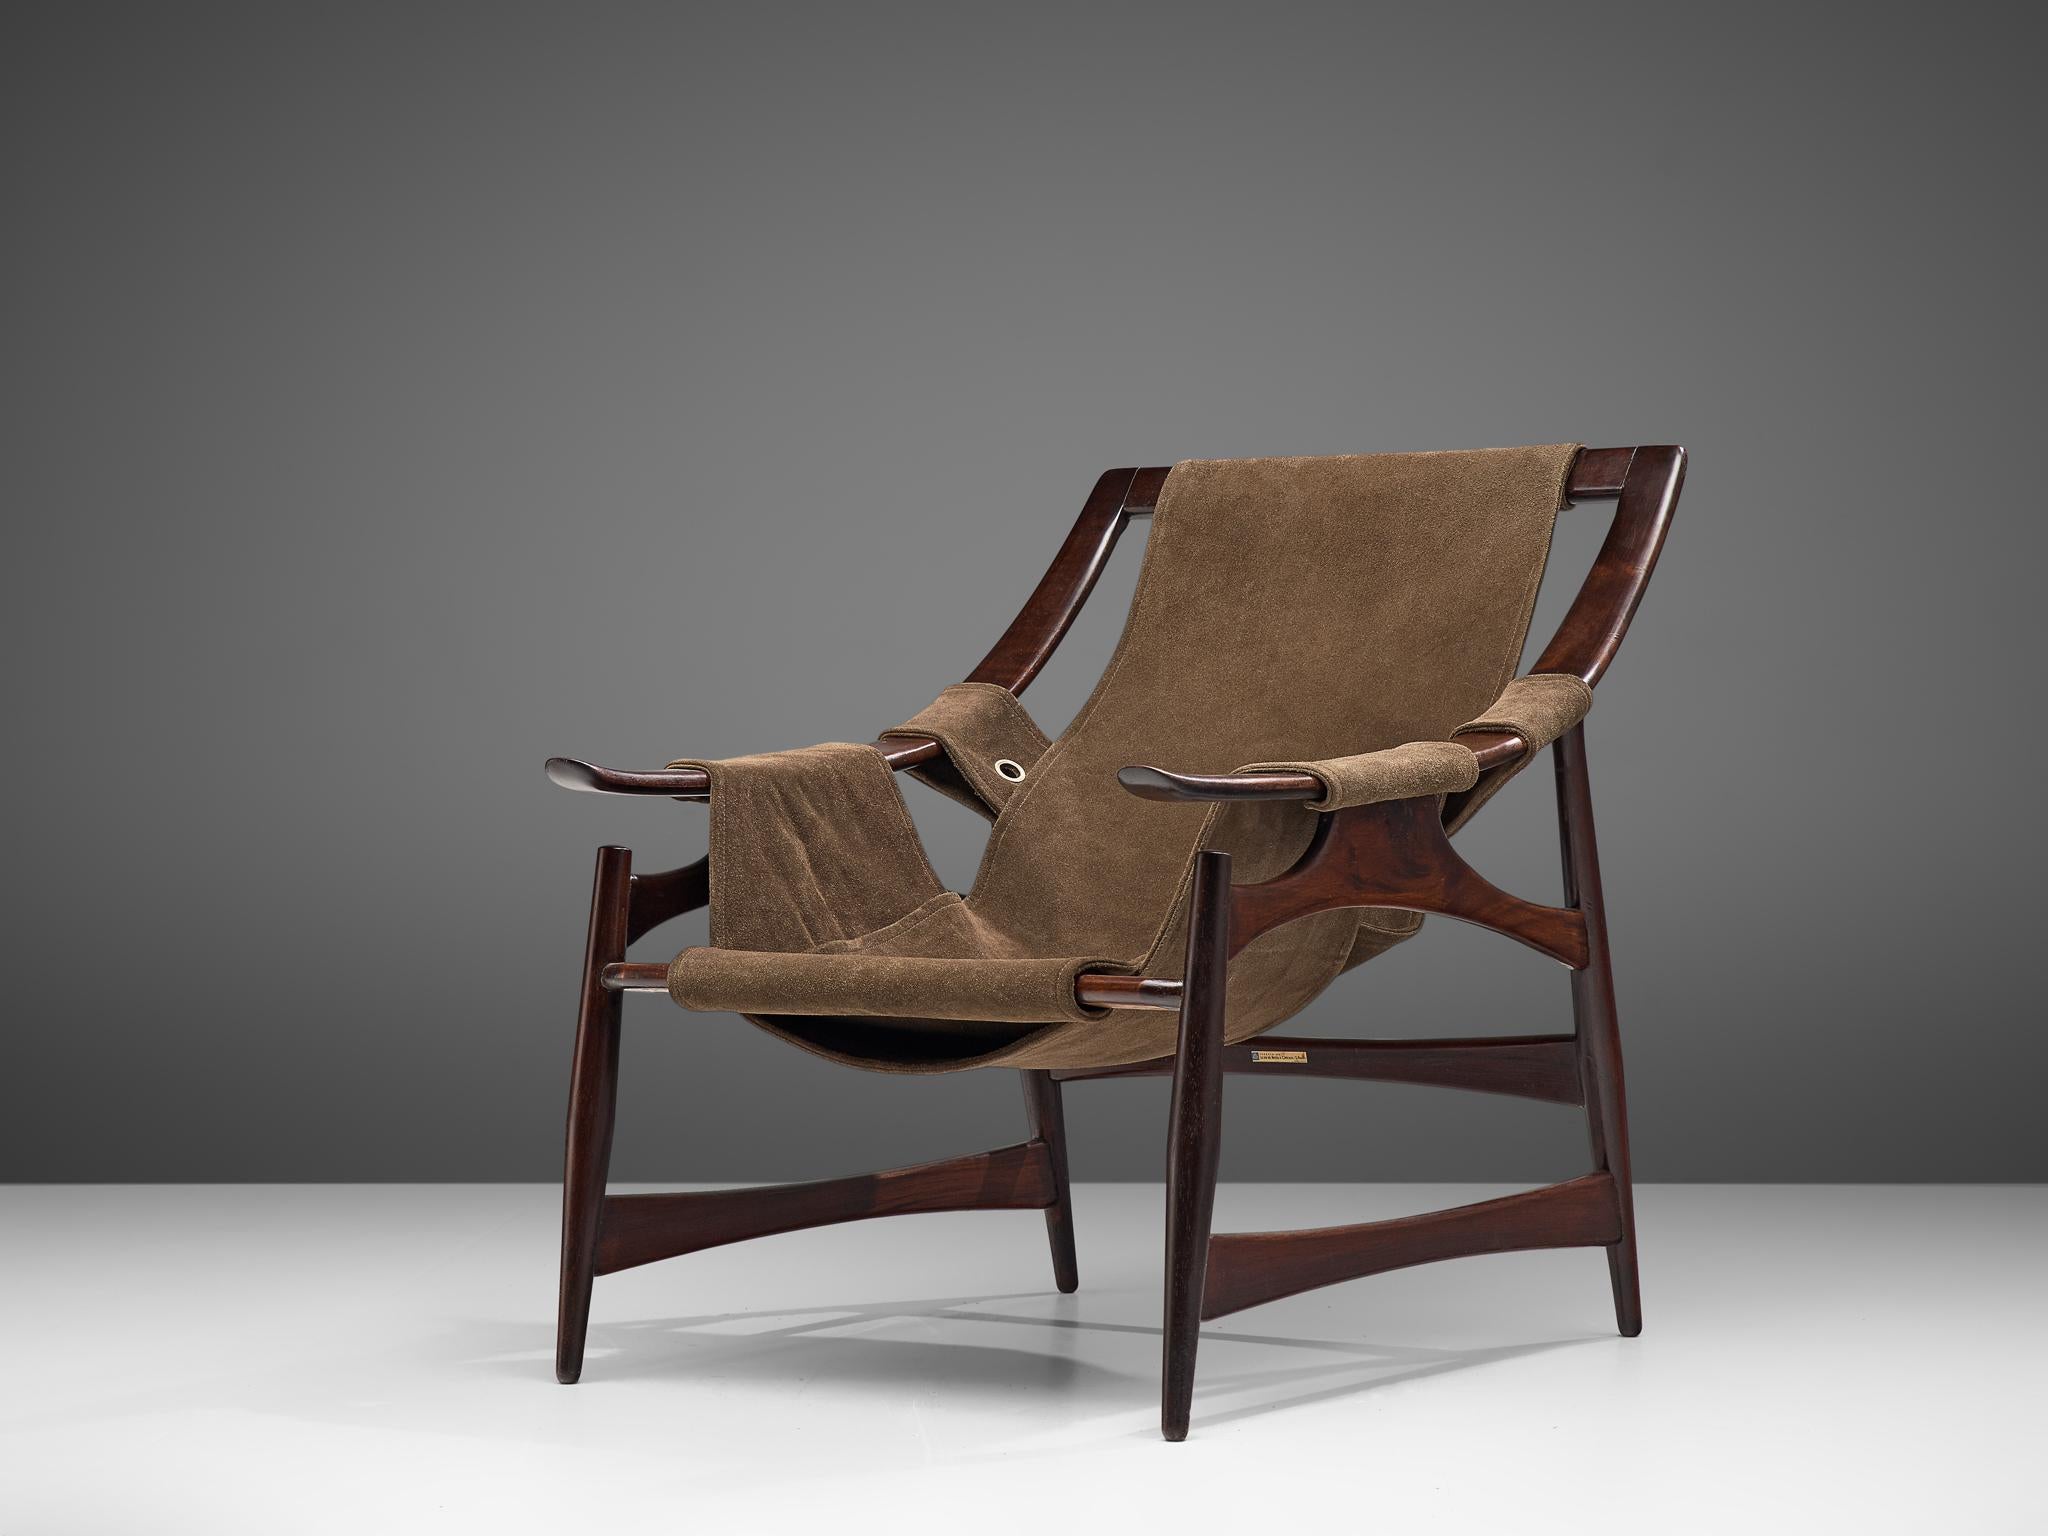 Liceu de Artes e Ofi´cios, lounge chair, imbuia and suede, Brazil, 1960s. 

Beautiful lounge chair in dark imbuia with a brown suede upholstery. The frame is a sort of wooden skeleton. An open character with beautiful lines and curves. The seating